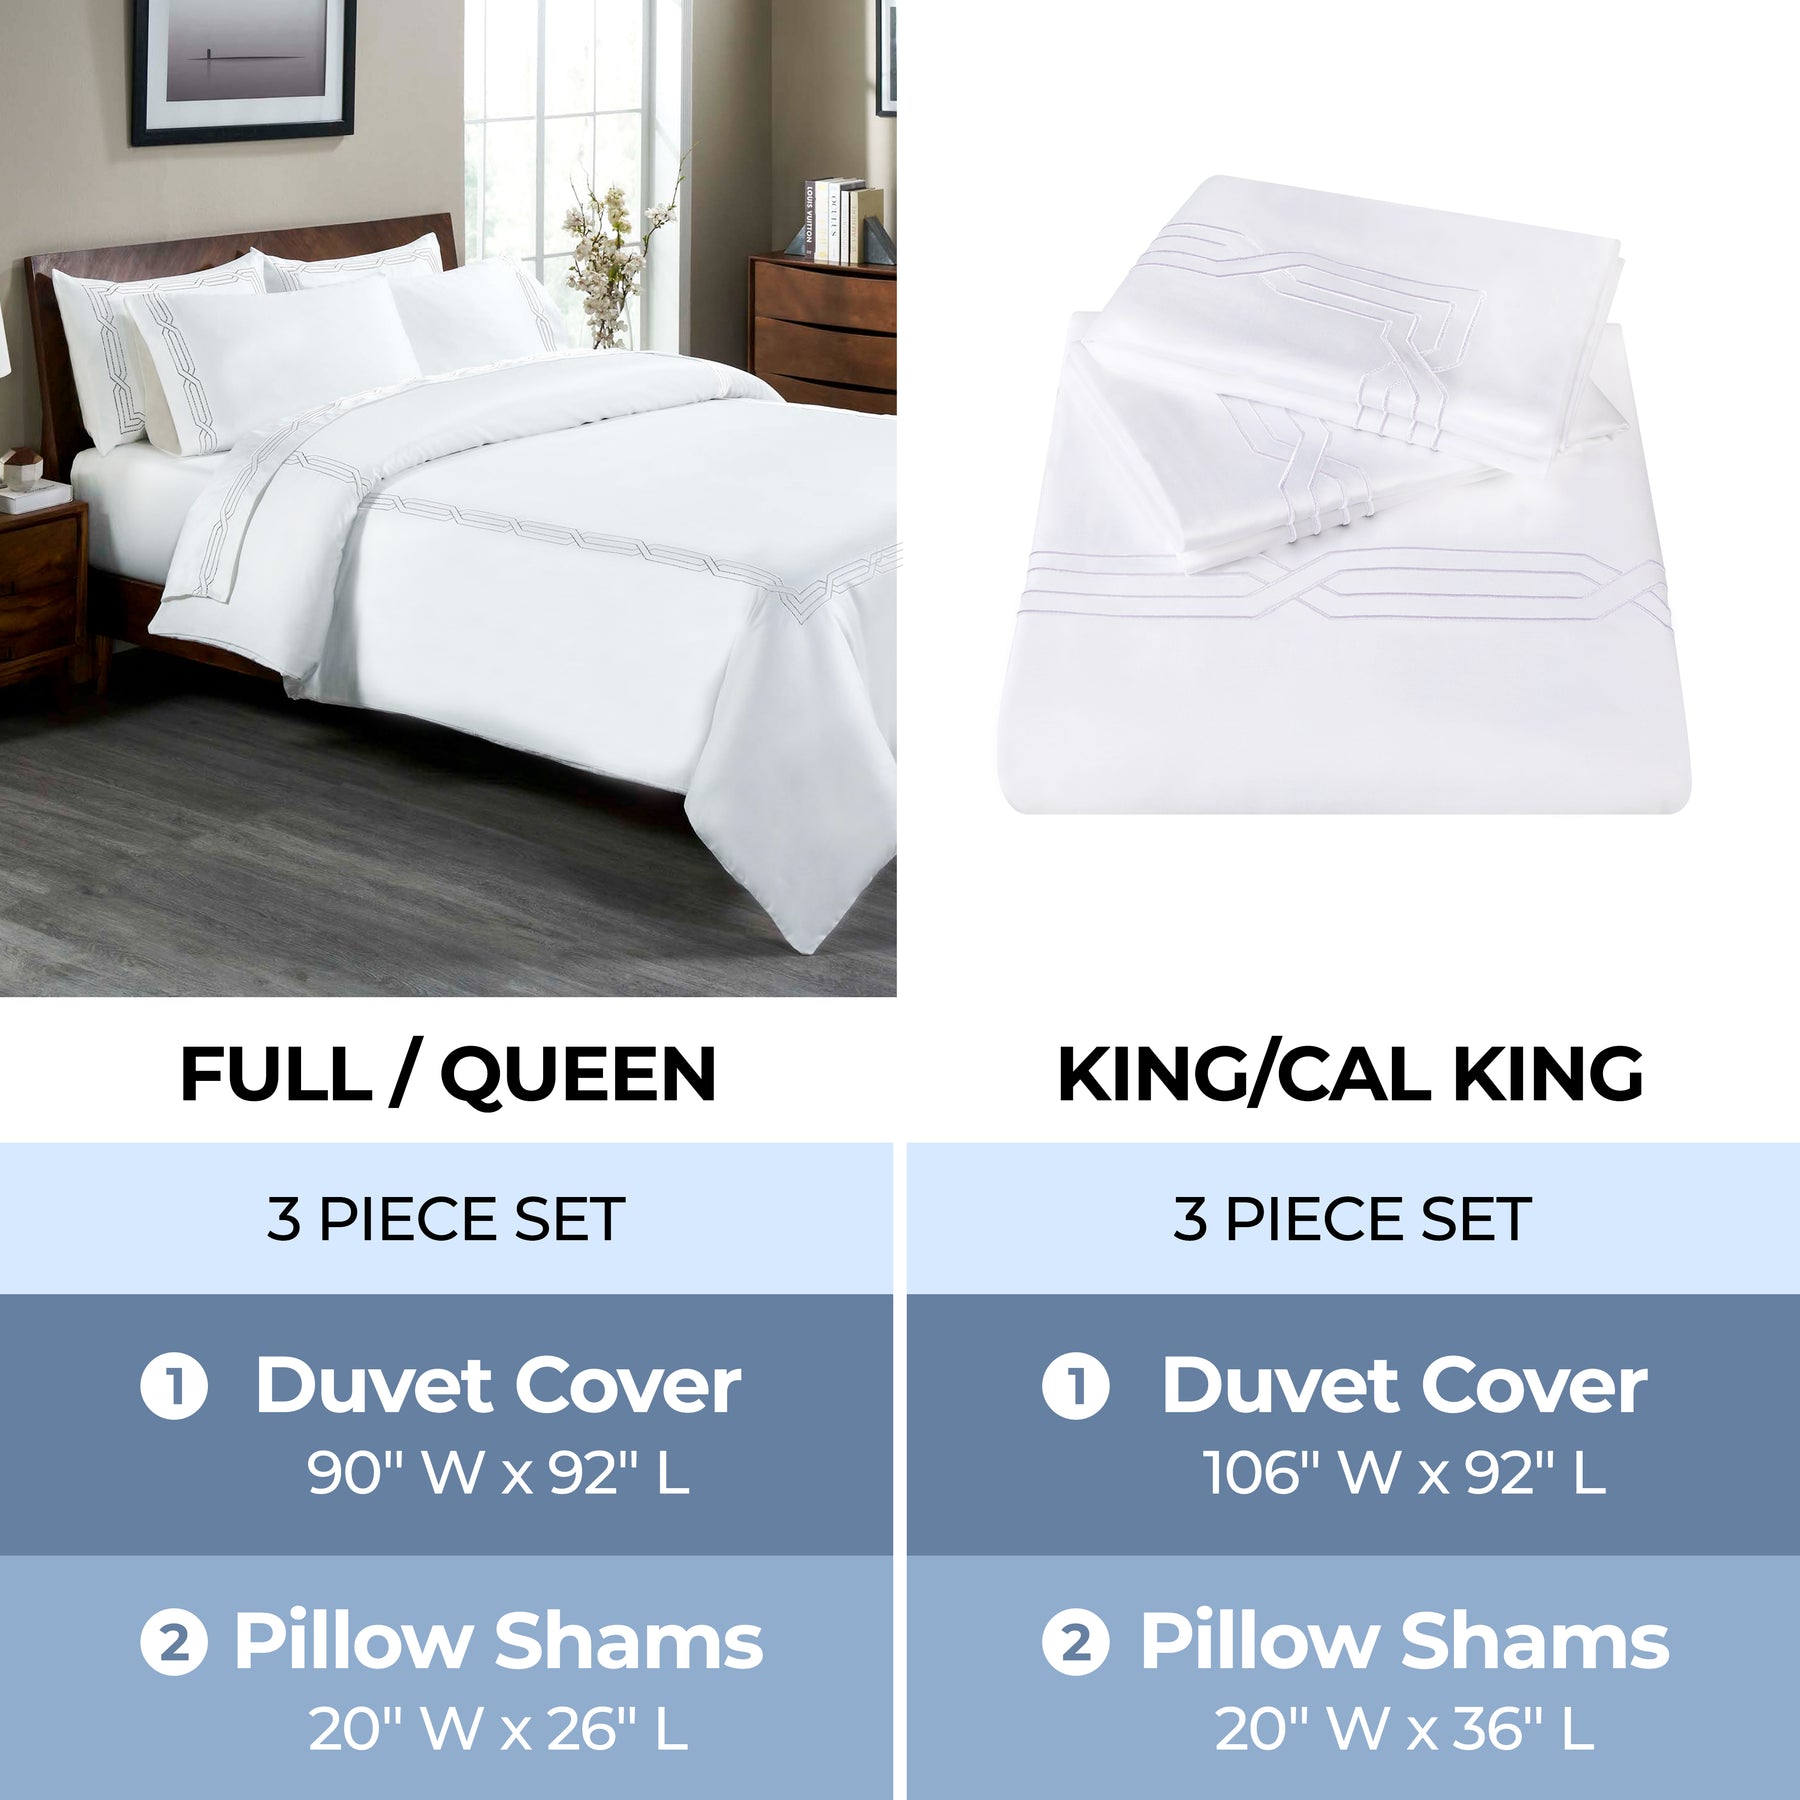 Superior Egyptian Cotton 1200 Thread Count Embroidered Geometric Scroll Duvet Cover Set - White- White